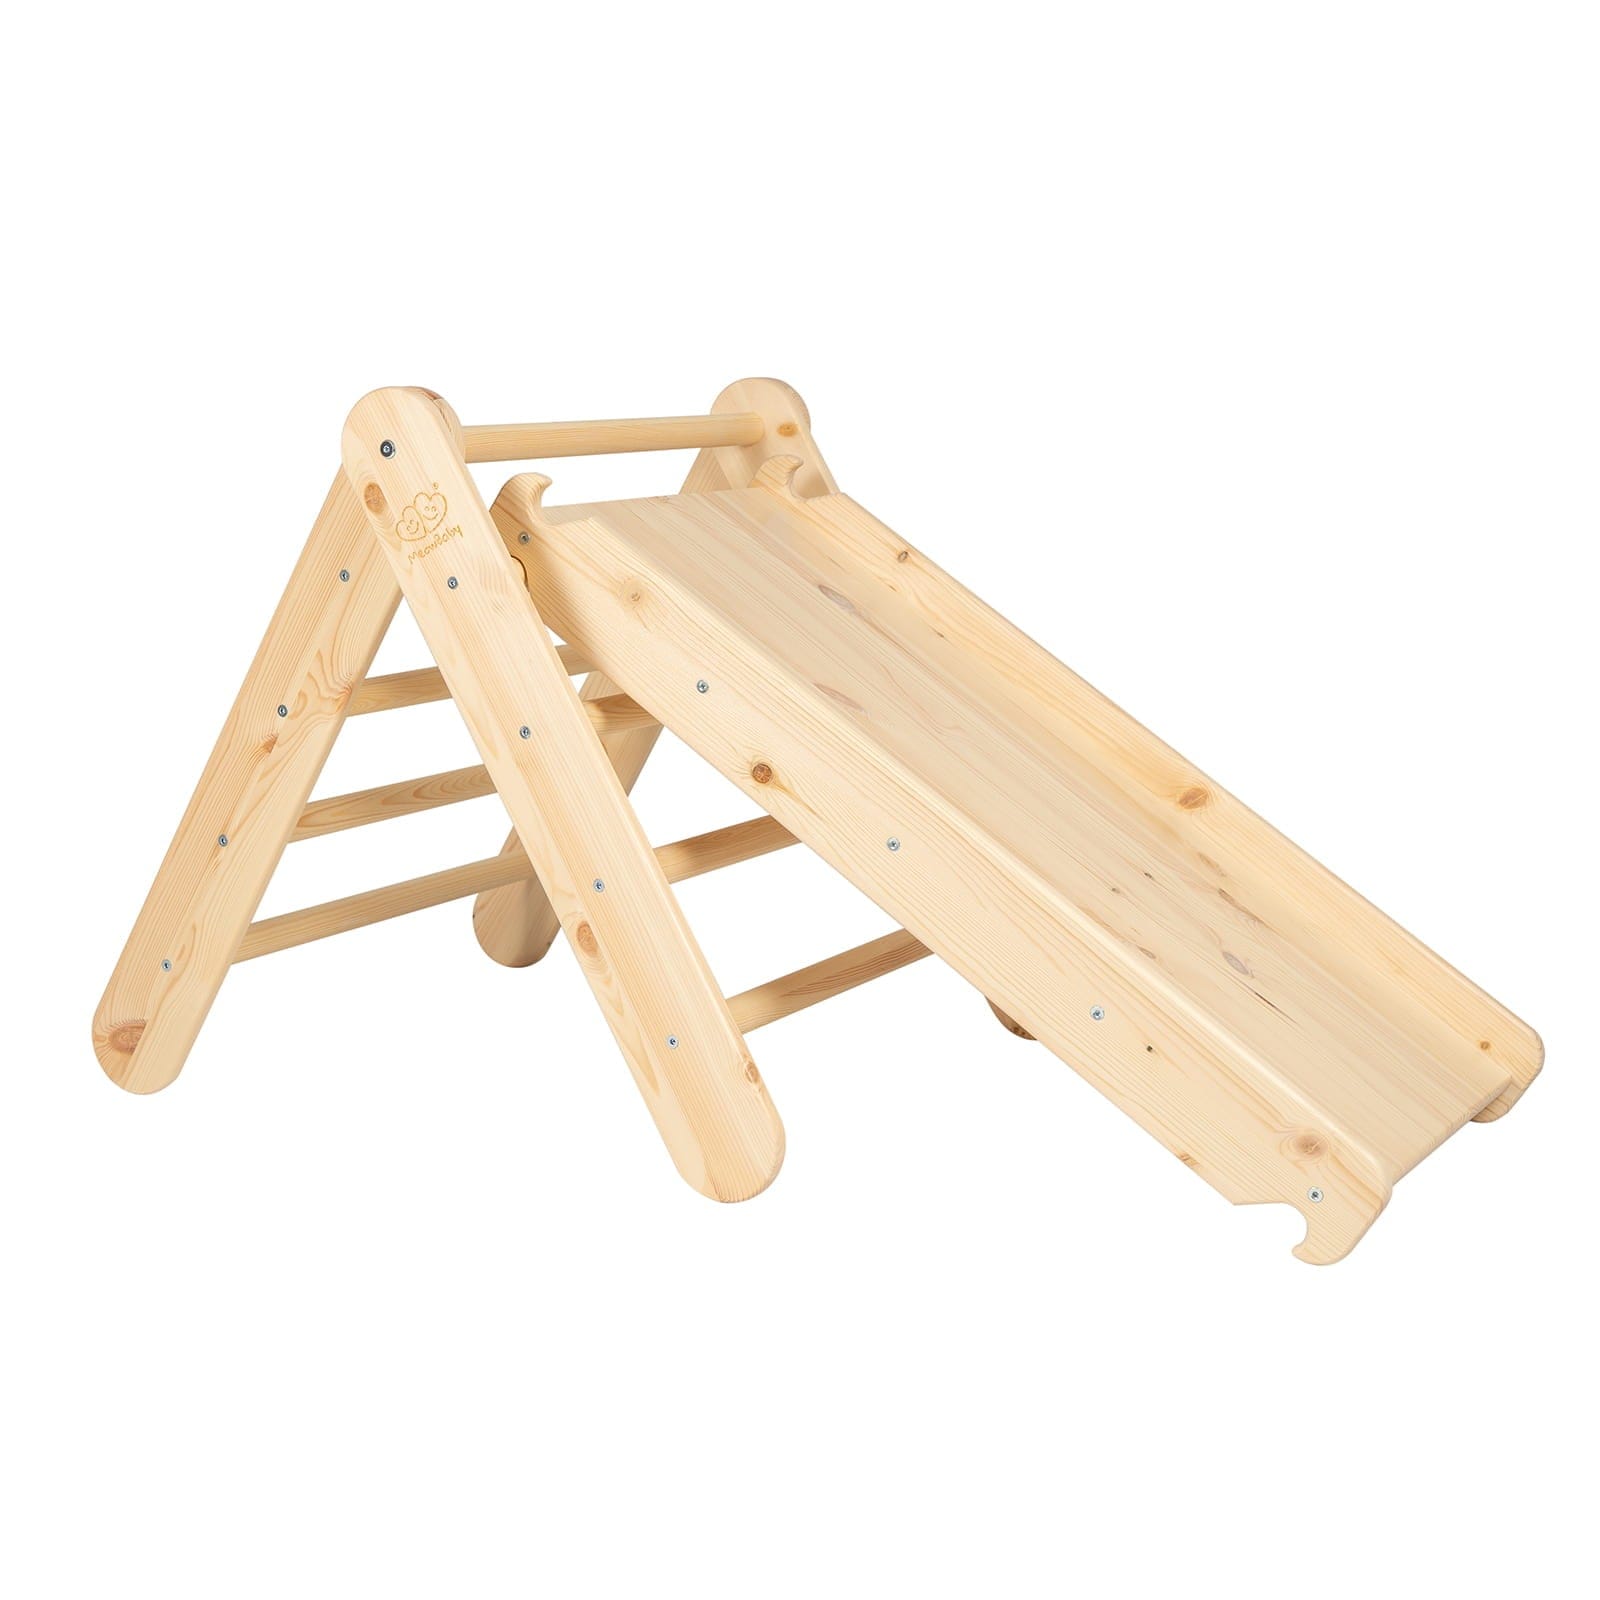 Wooden Slide Climbing Ladder Combo For Kids By MeowBaby - Stylemykid.com